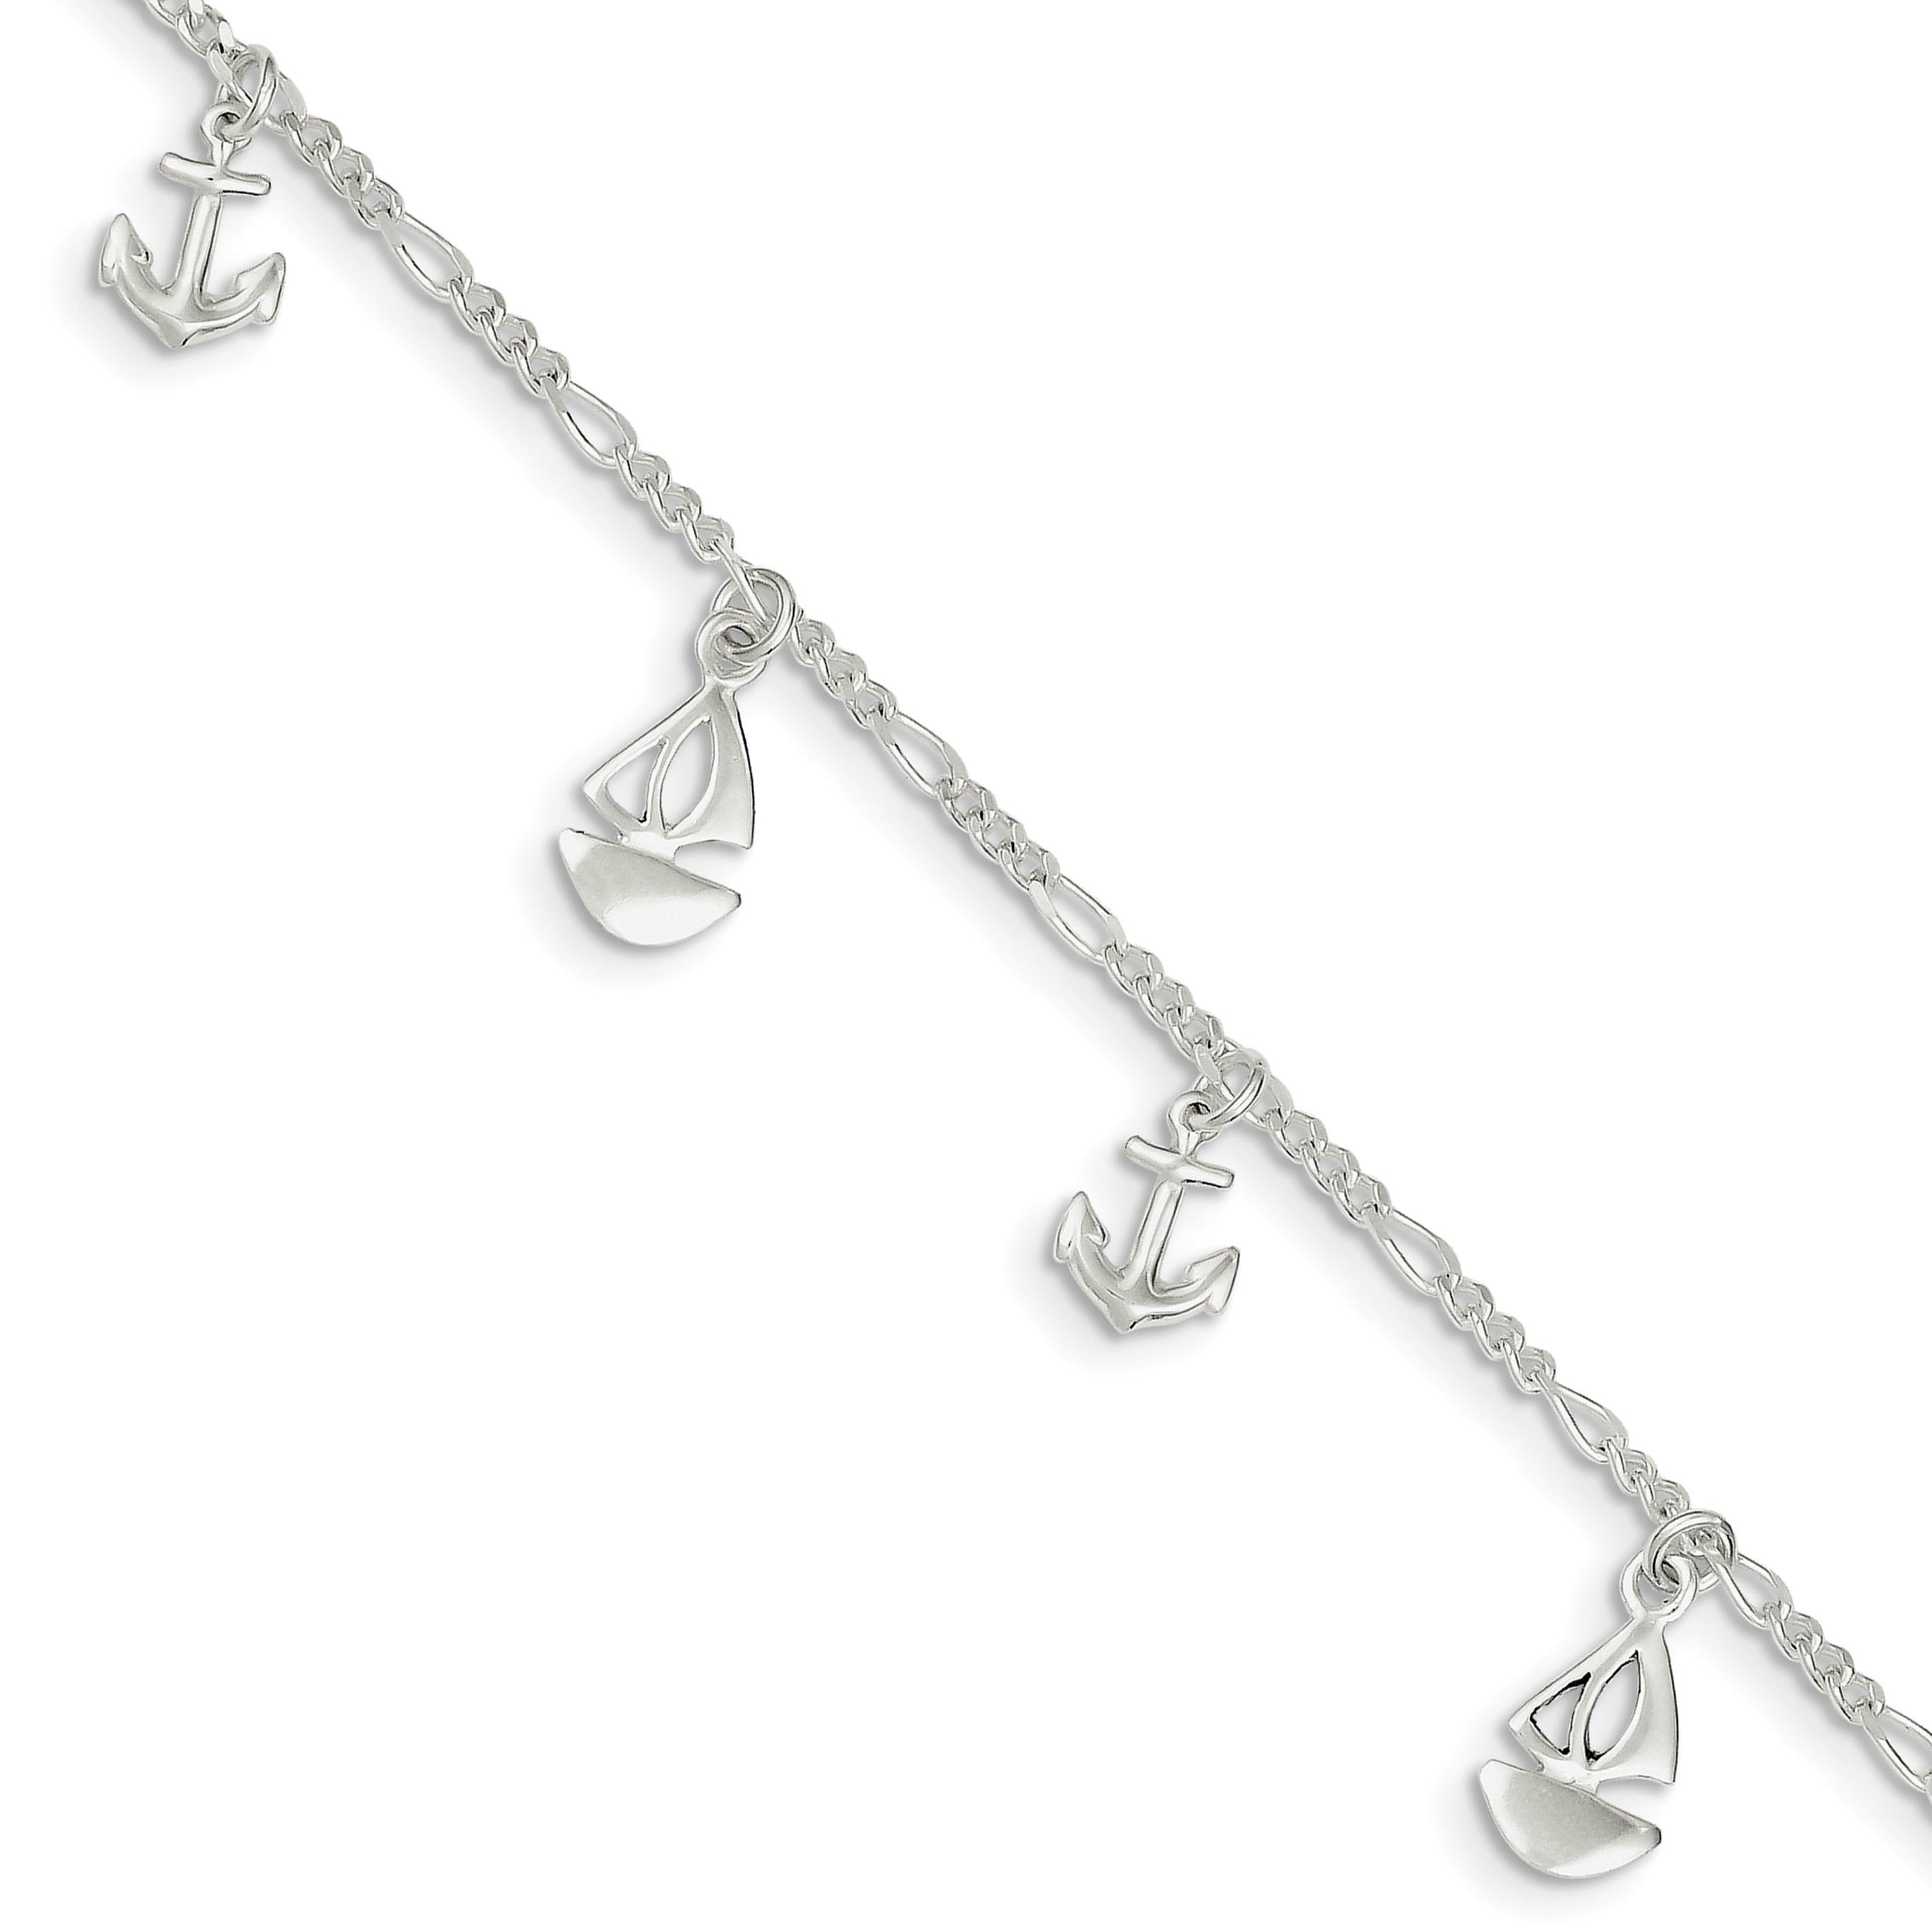 925 Sterling Silver 2mm Polished Novelty Chain Anklet with 1in Extender Length